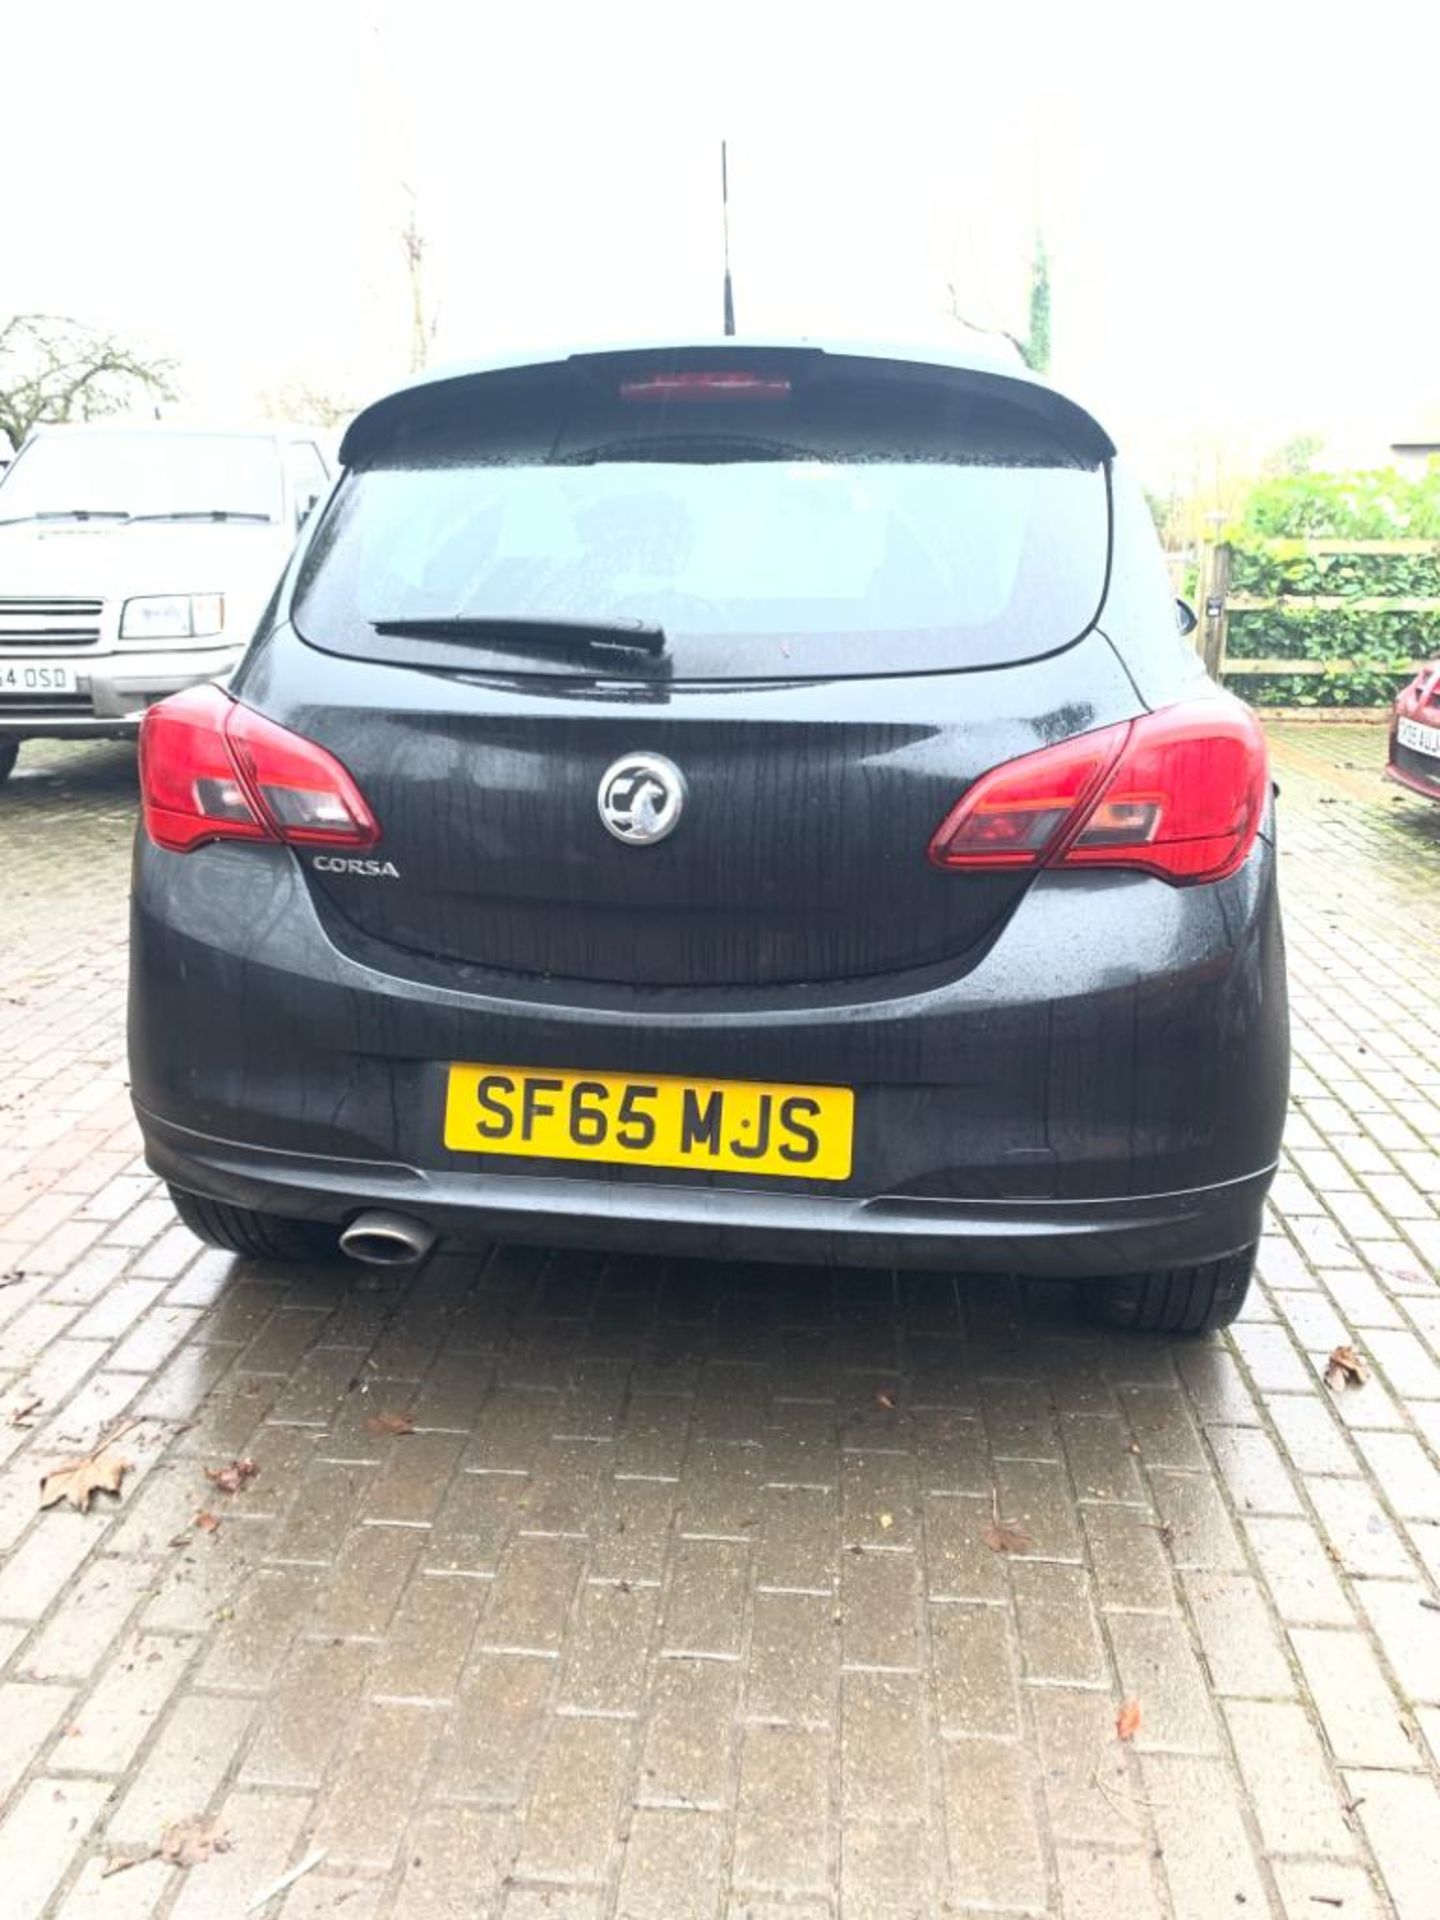 2016/65 REG VAUXHALL CORSA LIMITED EDITION 1.4 PETROL 3 DOOR HATCHBACK, SHOWING 2 FORMER KEEPERS - Image 5 of 16